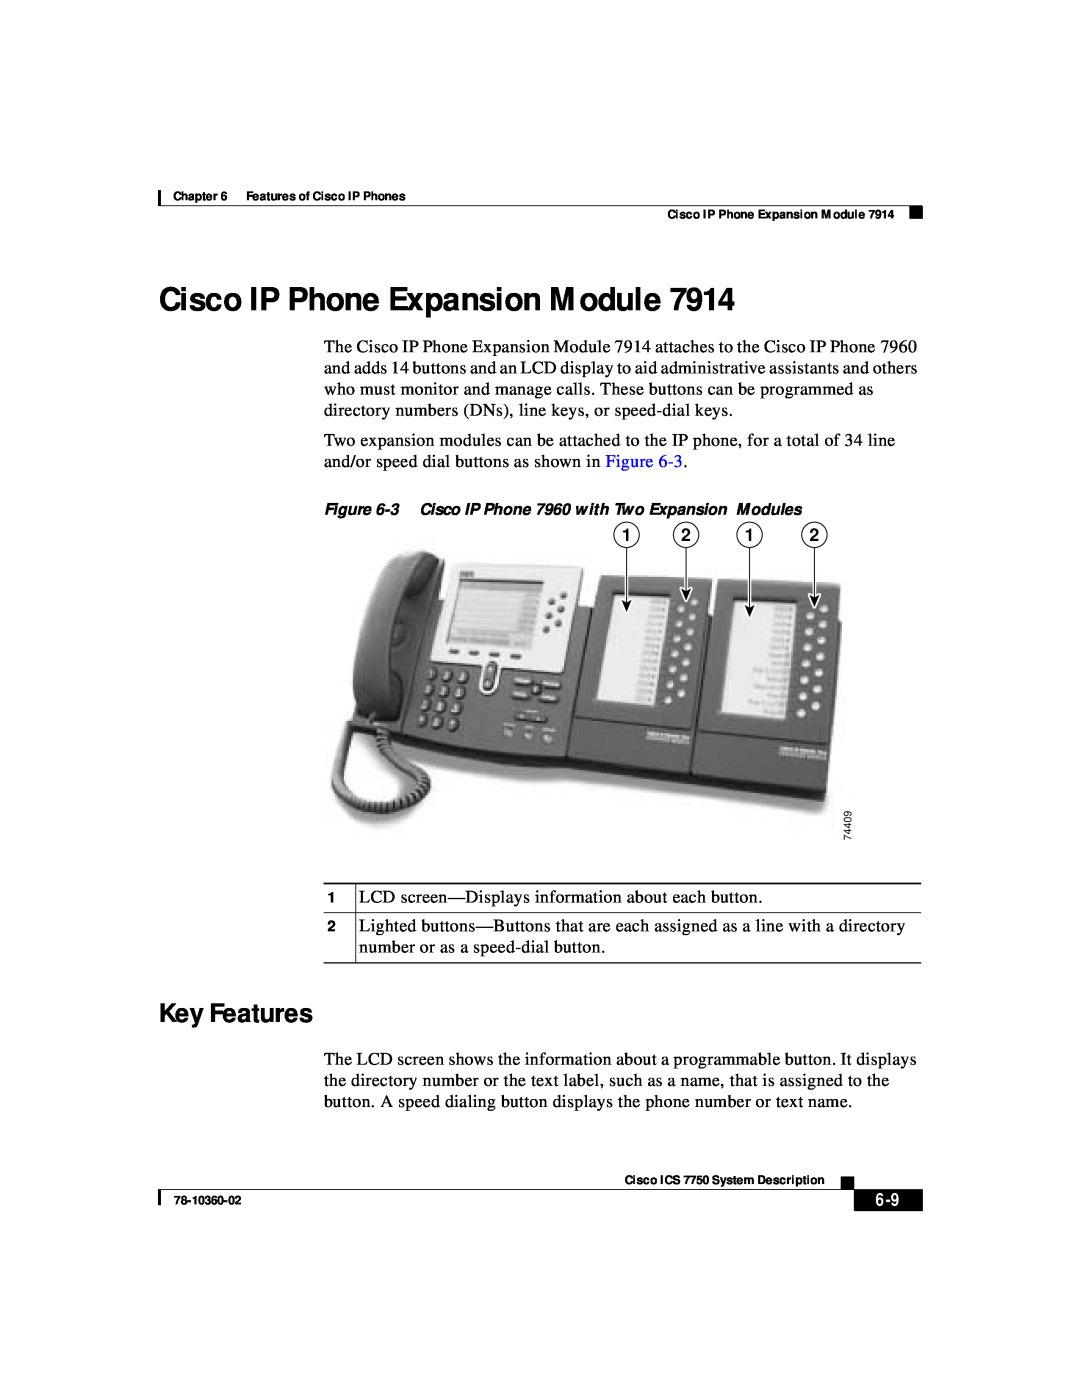 Cisco Systems ICS-7750 manual Cisco IP Phone Expansion Module, Key Features, 1 2 1 